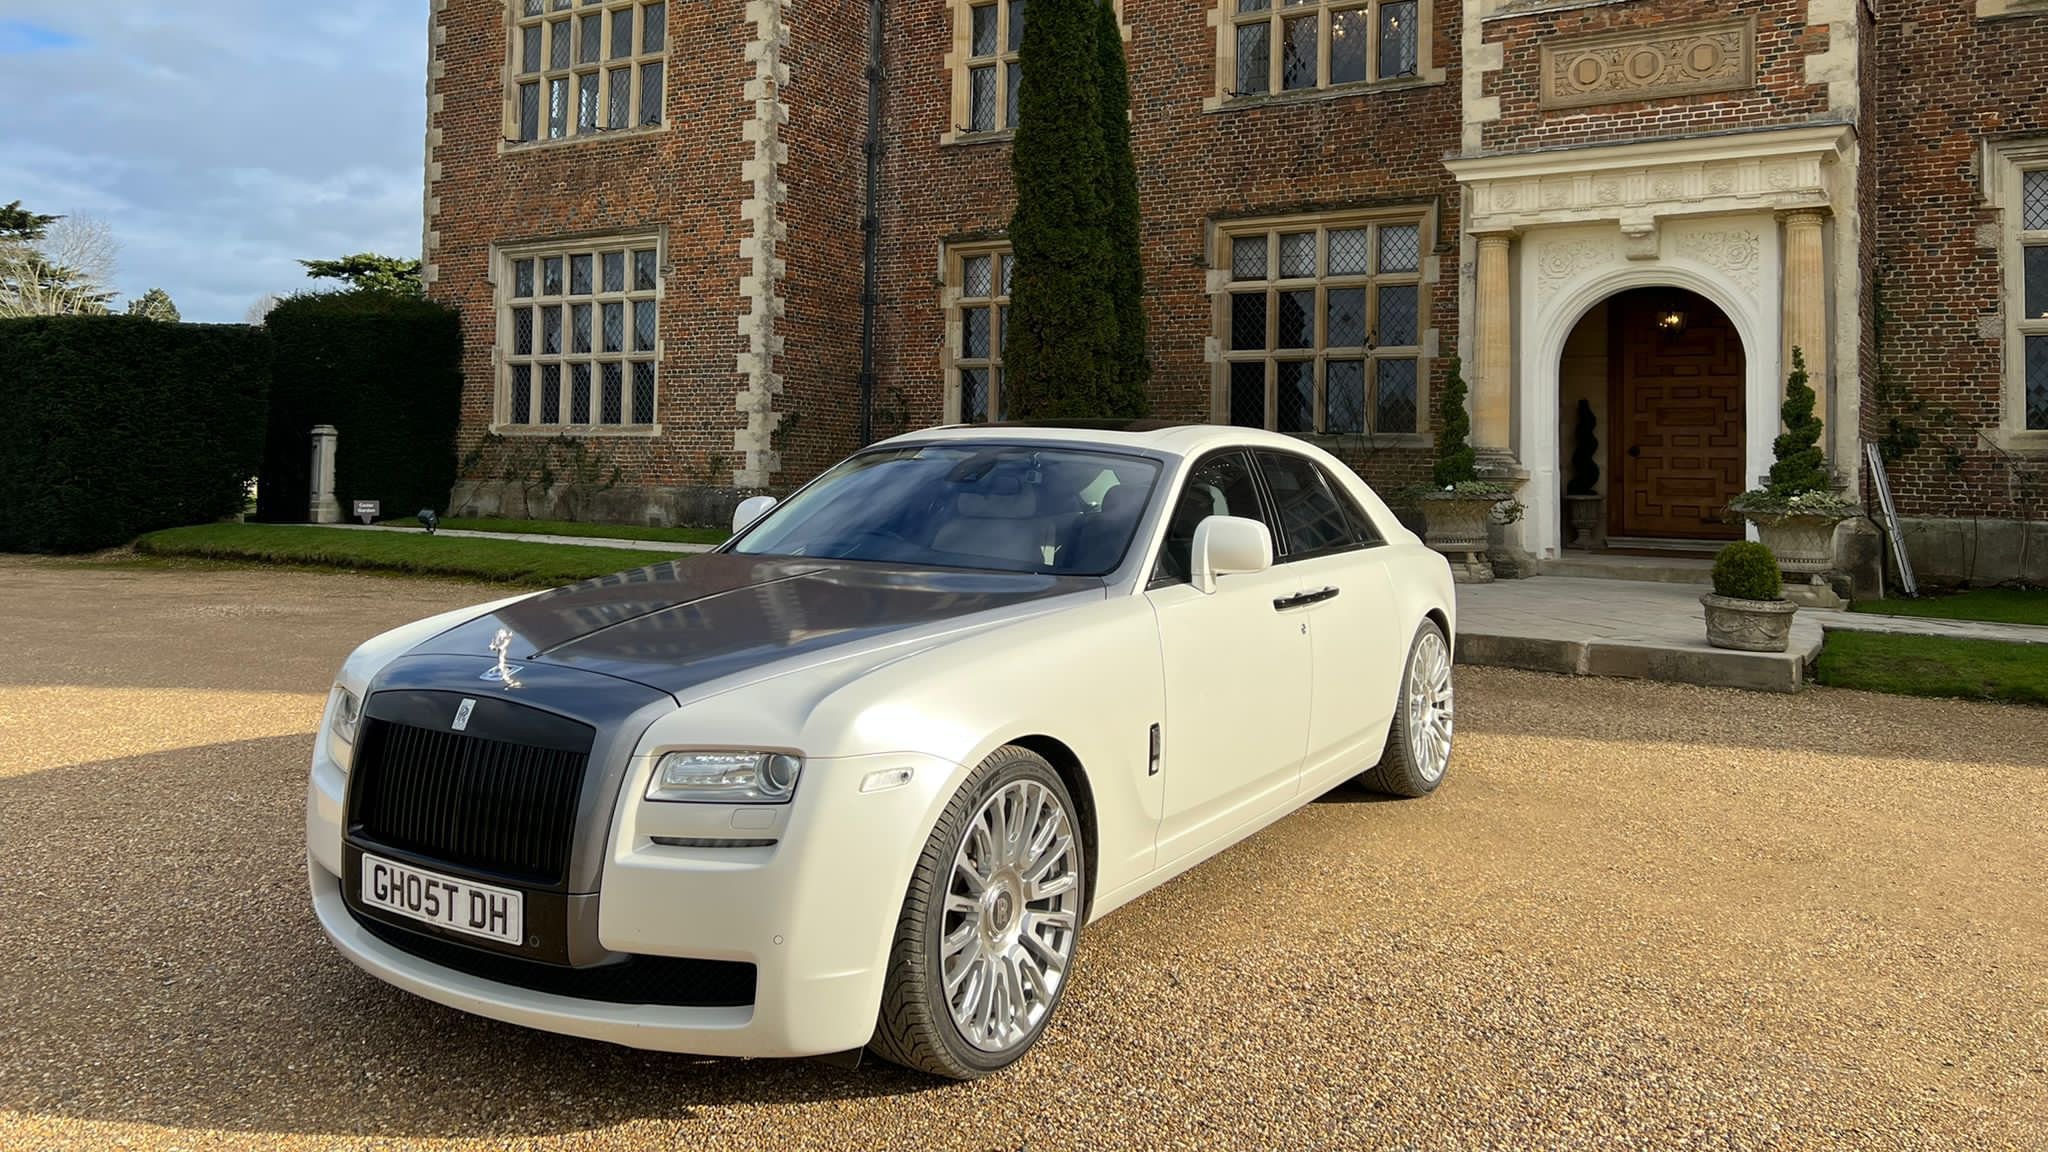 White Rolls-Royce Ghost with silver bonnet parked in front of a wedding venue in Surrey.